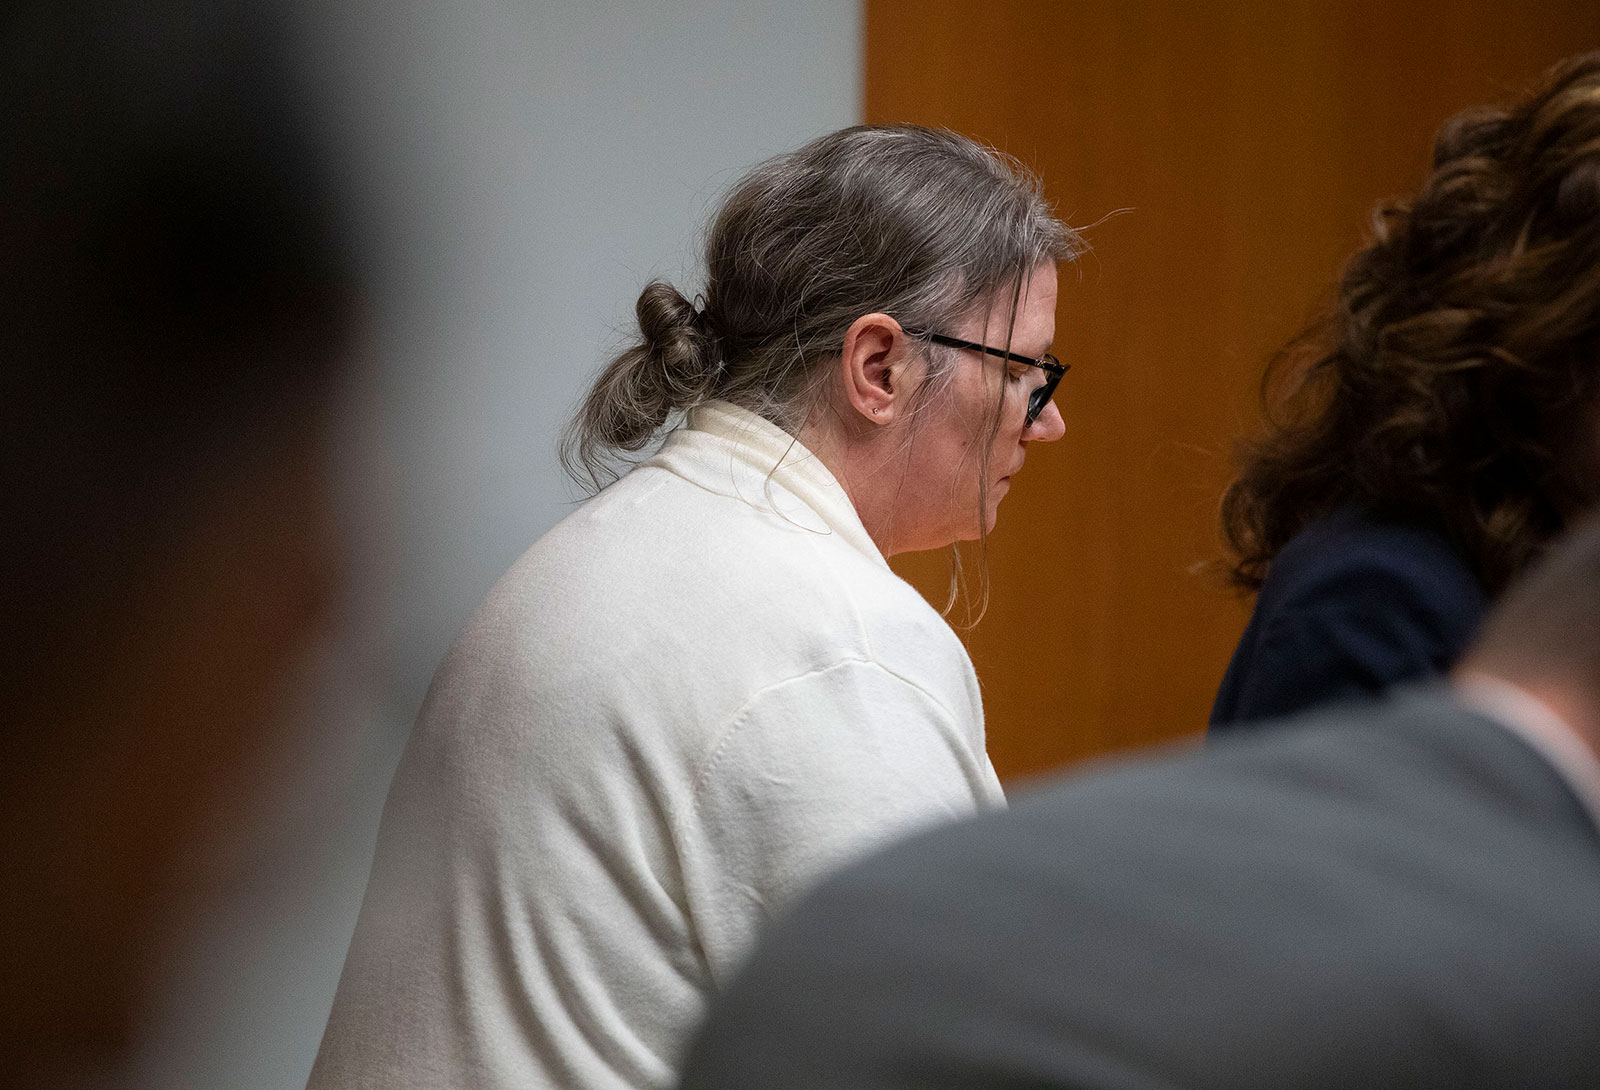 Jennifer Crumbley stands to exit the courtroom in Oakland County Circuit Court after the jury found her guilty on four counts of involuntary manslaughter on Tuesday in Pontiac, Michigan. 